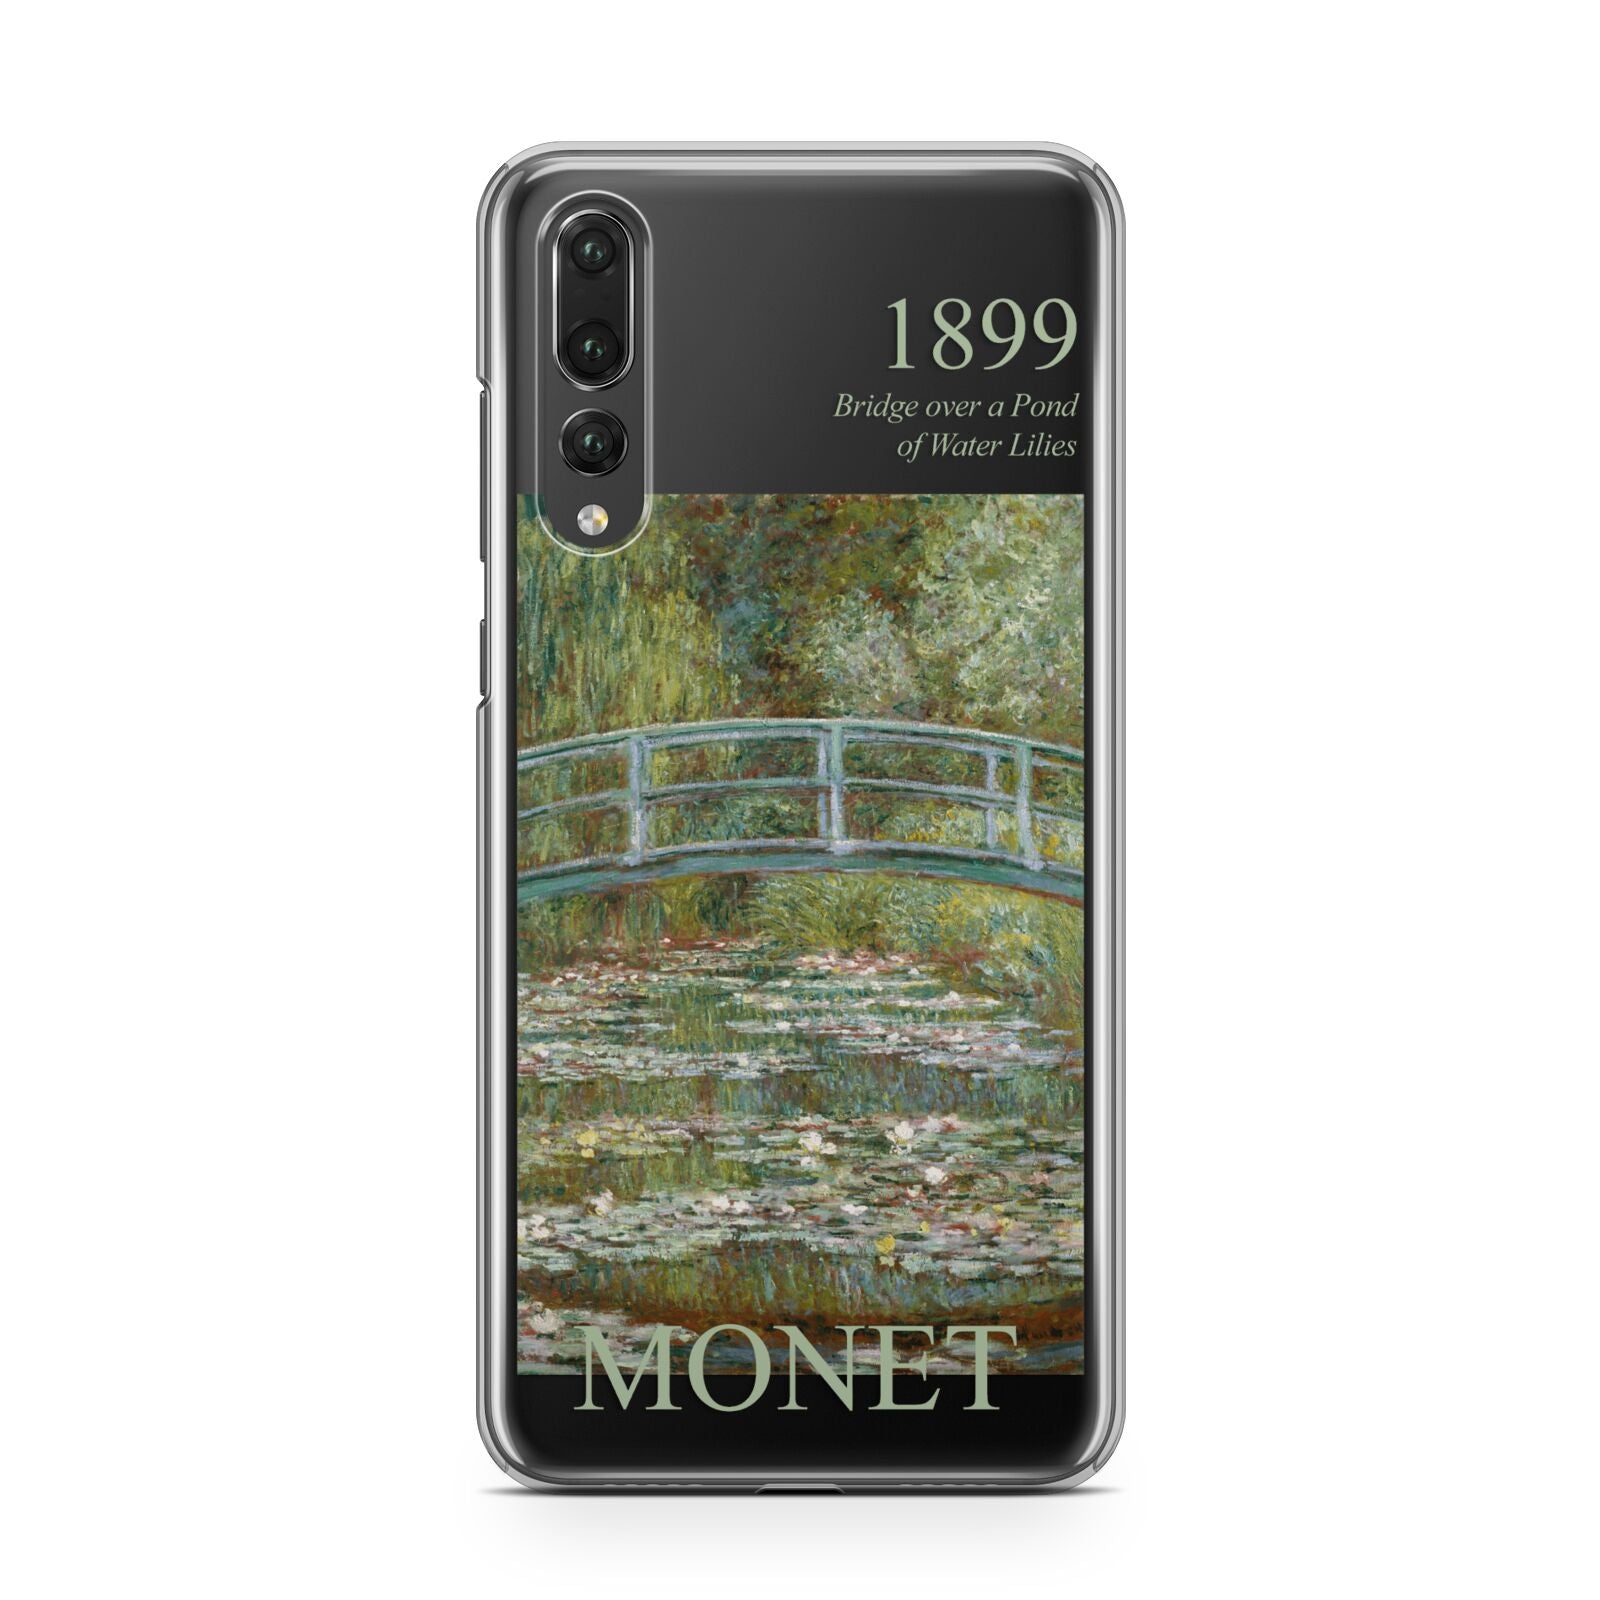 Bridge Over A Pond Of Water Lilies By Monet Huawei P20 Pro Phone Case